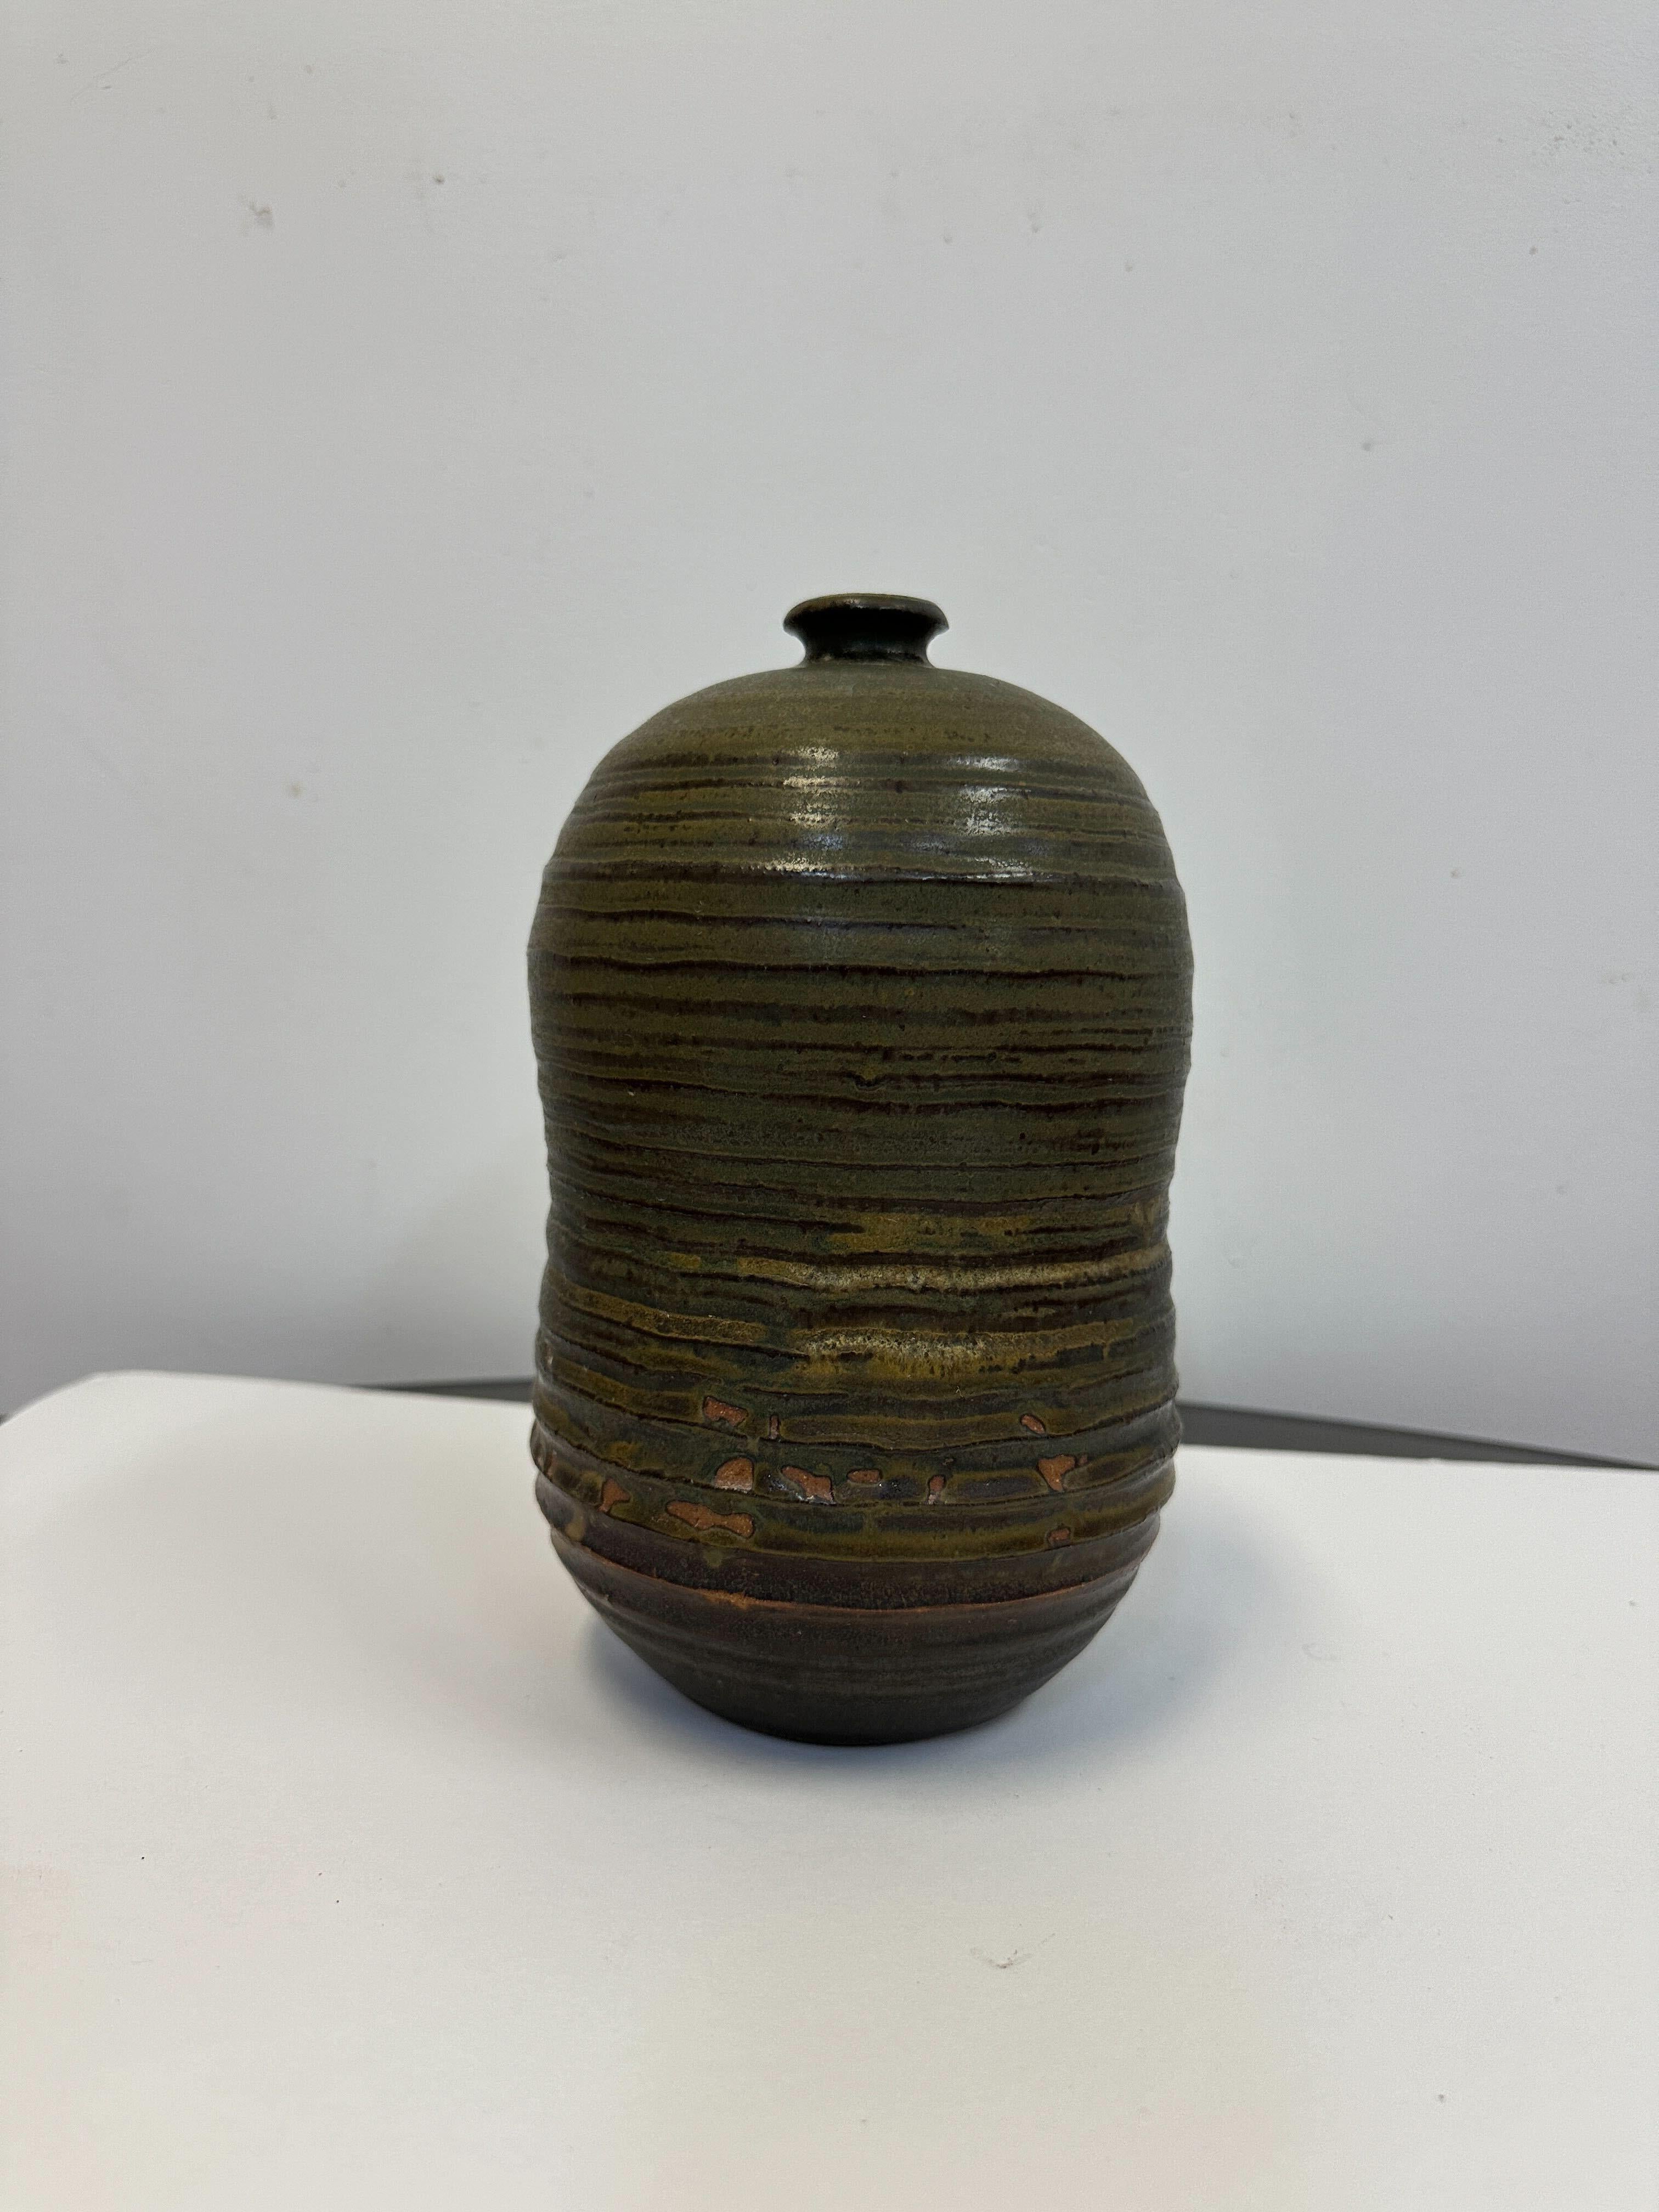 This beautiful earthenware vessel is in very good overall condition. Resembling the style of Toshiko Takaezu pottery. Measuring 9.5